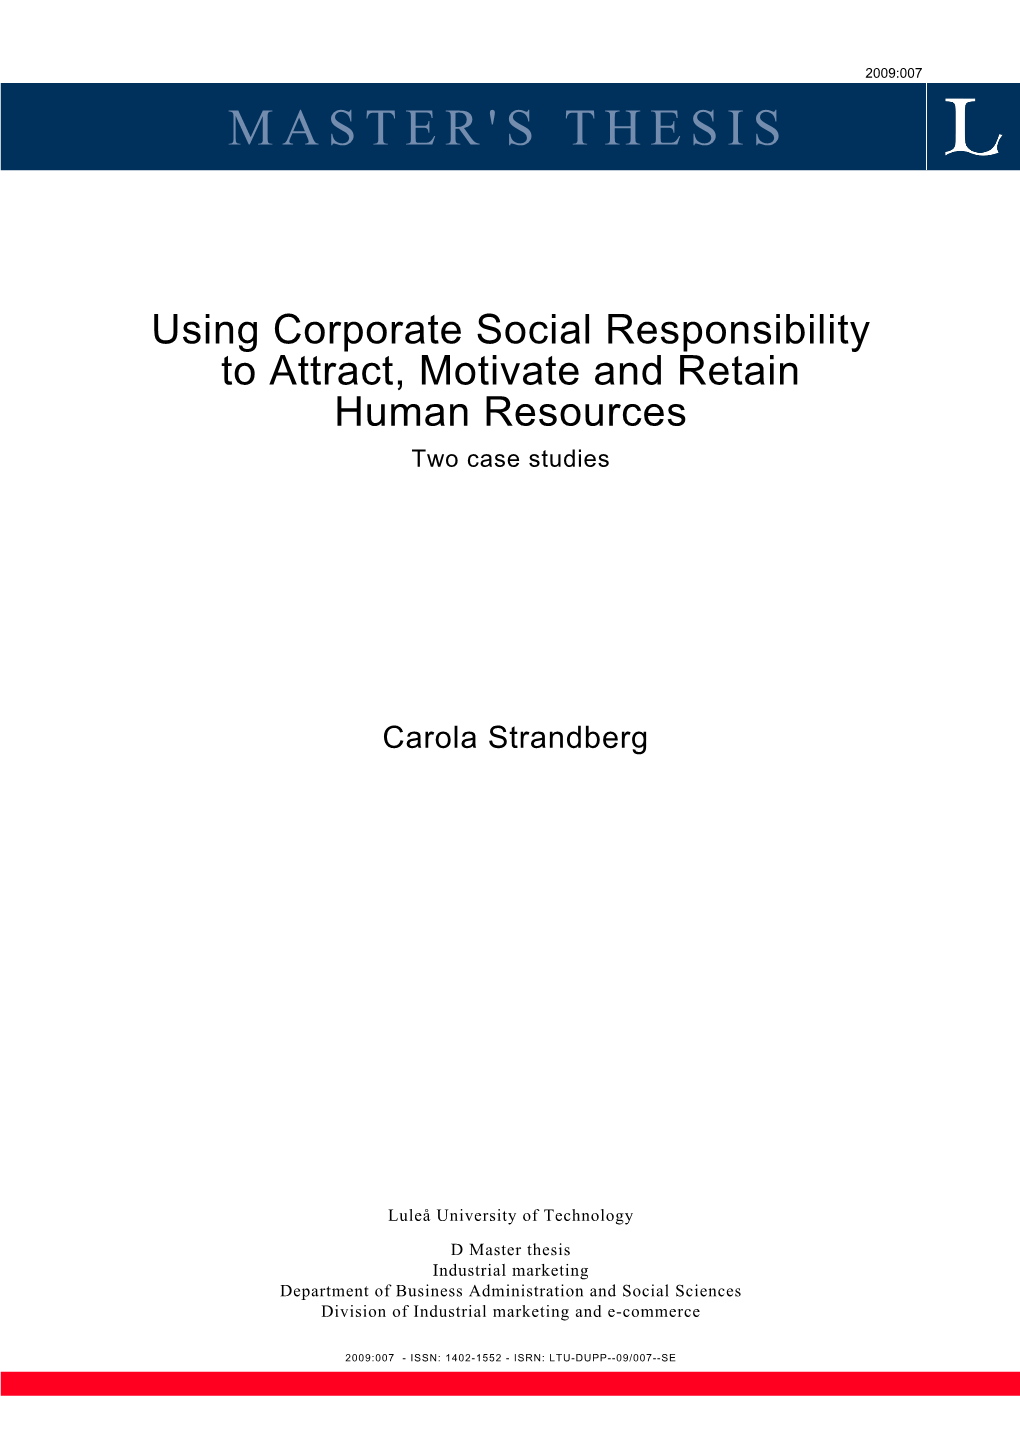 Using Corporate Social Responsibility to Attract, Motivate and Retain Human Resources Two Case Studies